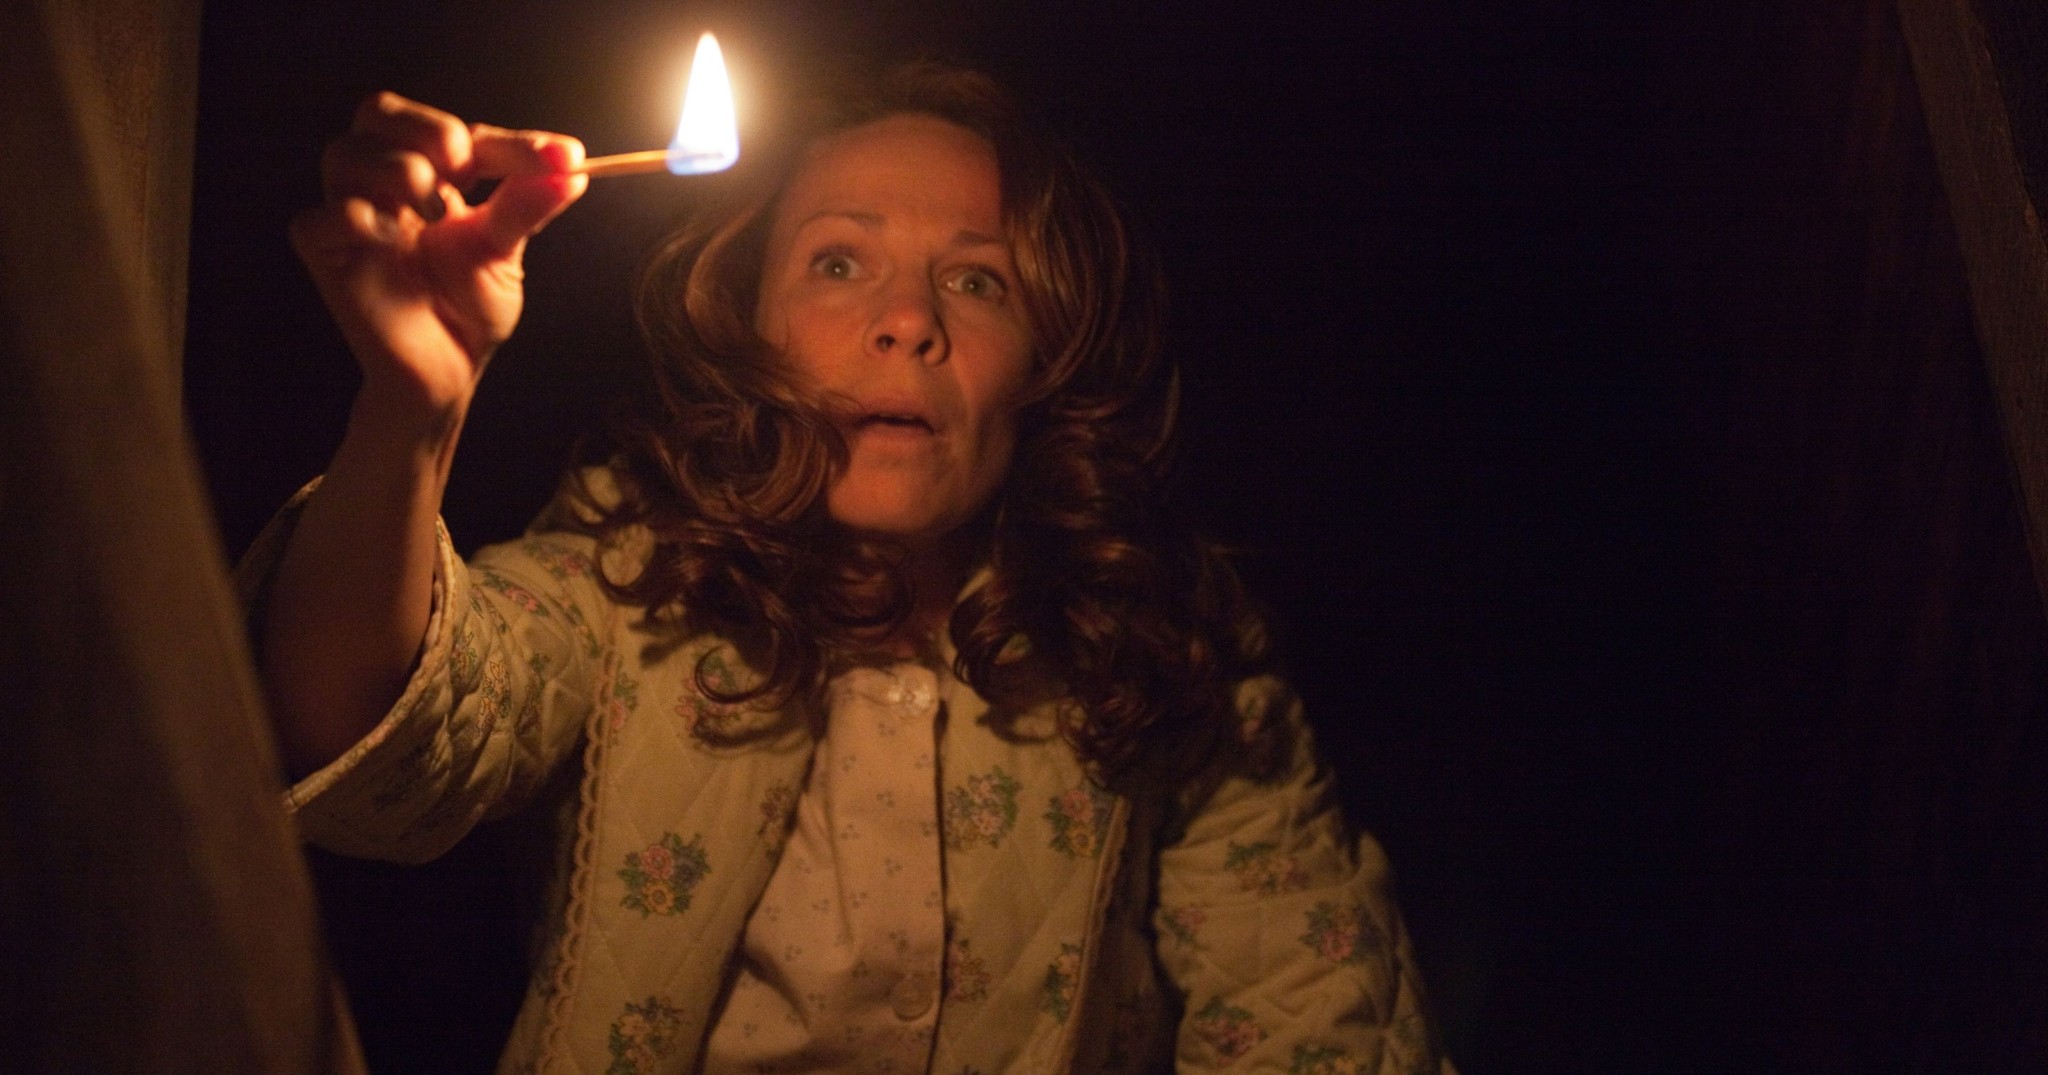 1374519912000-ap-film-review-the-conjuring-57018192-1307230815_16_9